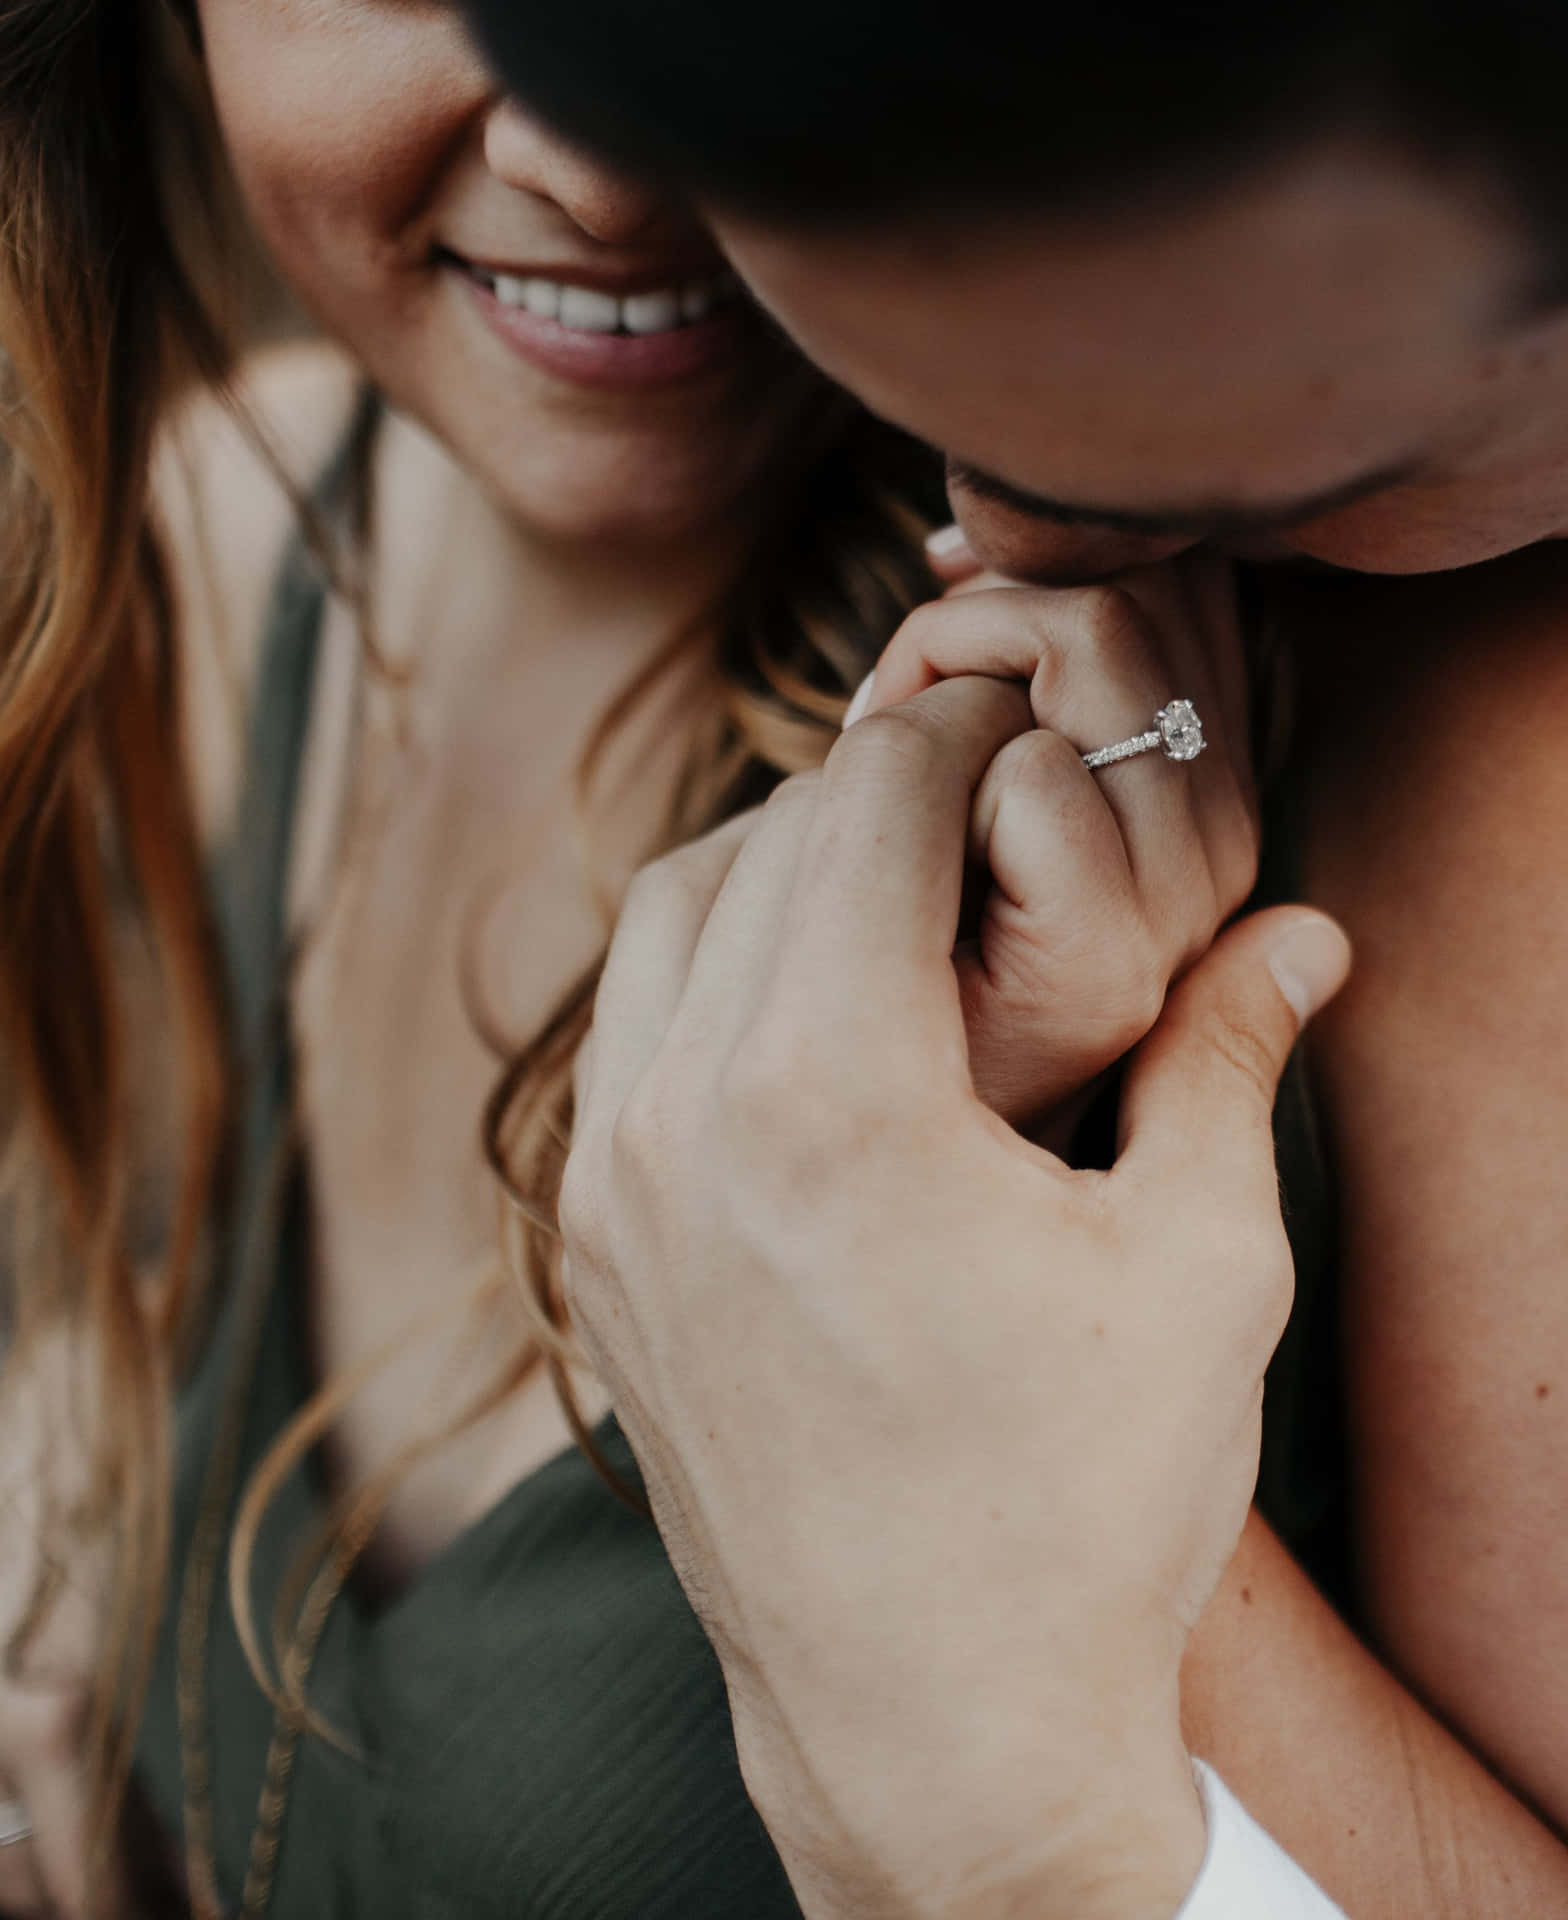 Captivating Engagement Photo Poses to Spark Your Imagination